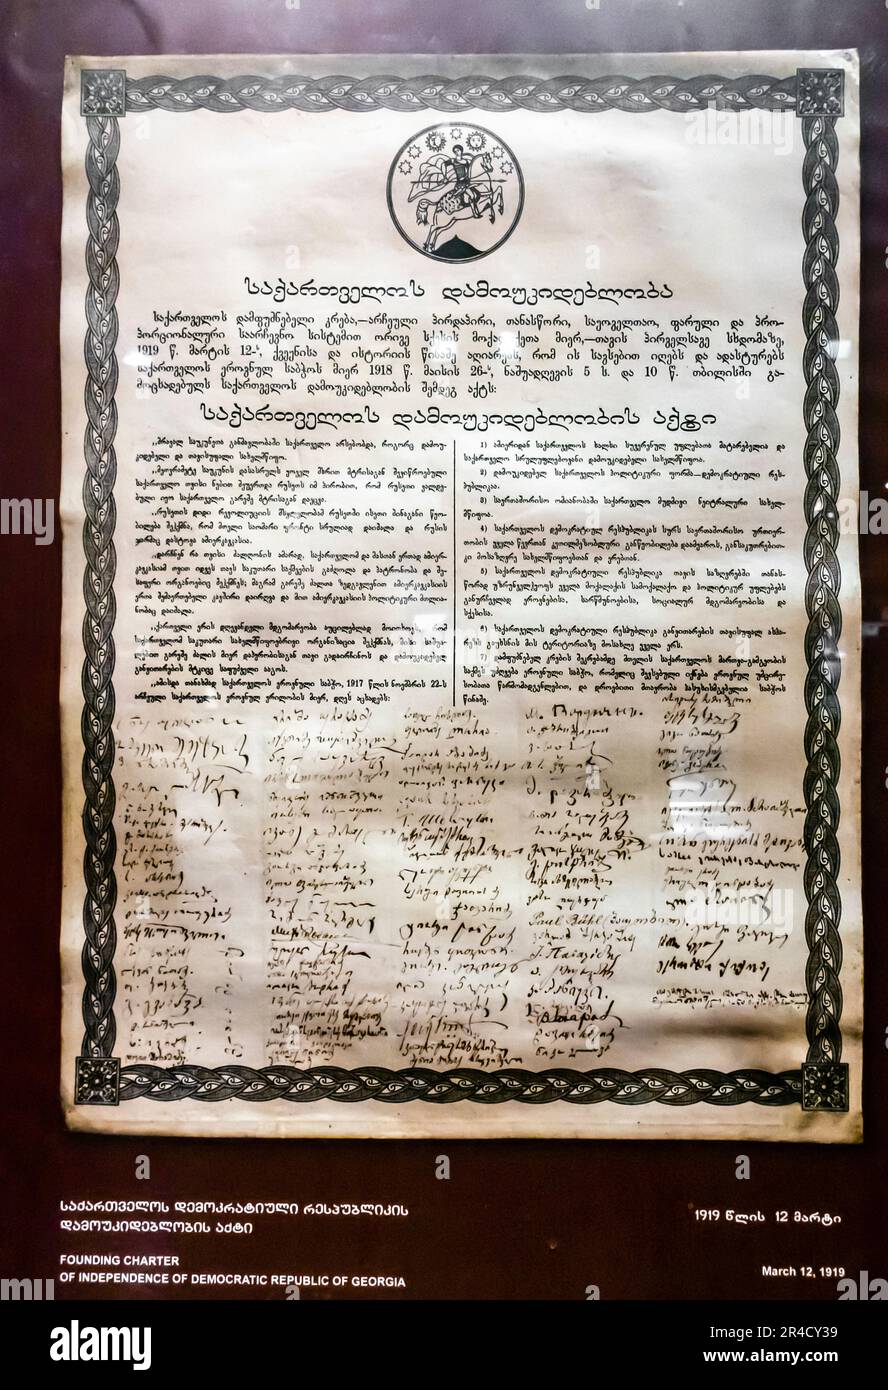 Founding chapter of independence of Democratic republic of Georgia. March 12 1919 Stock Photo